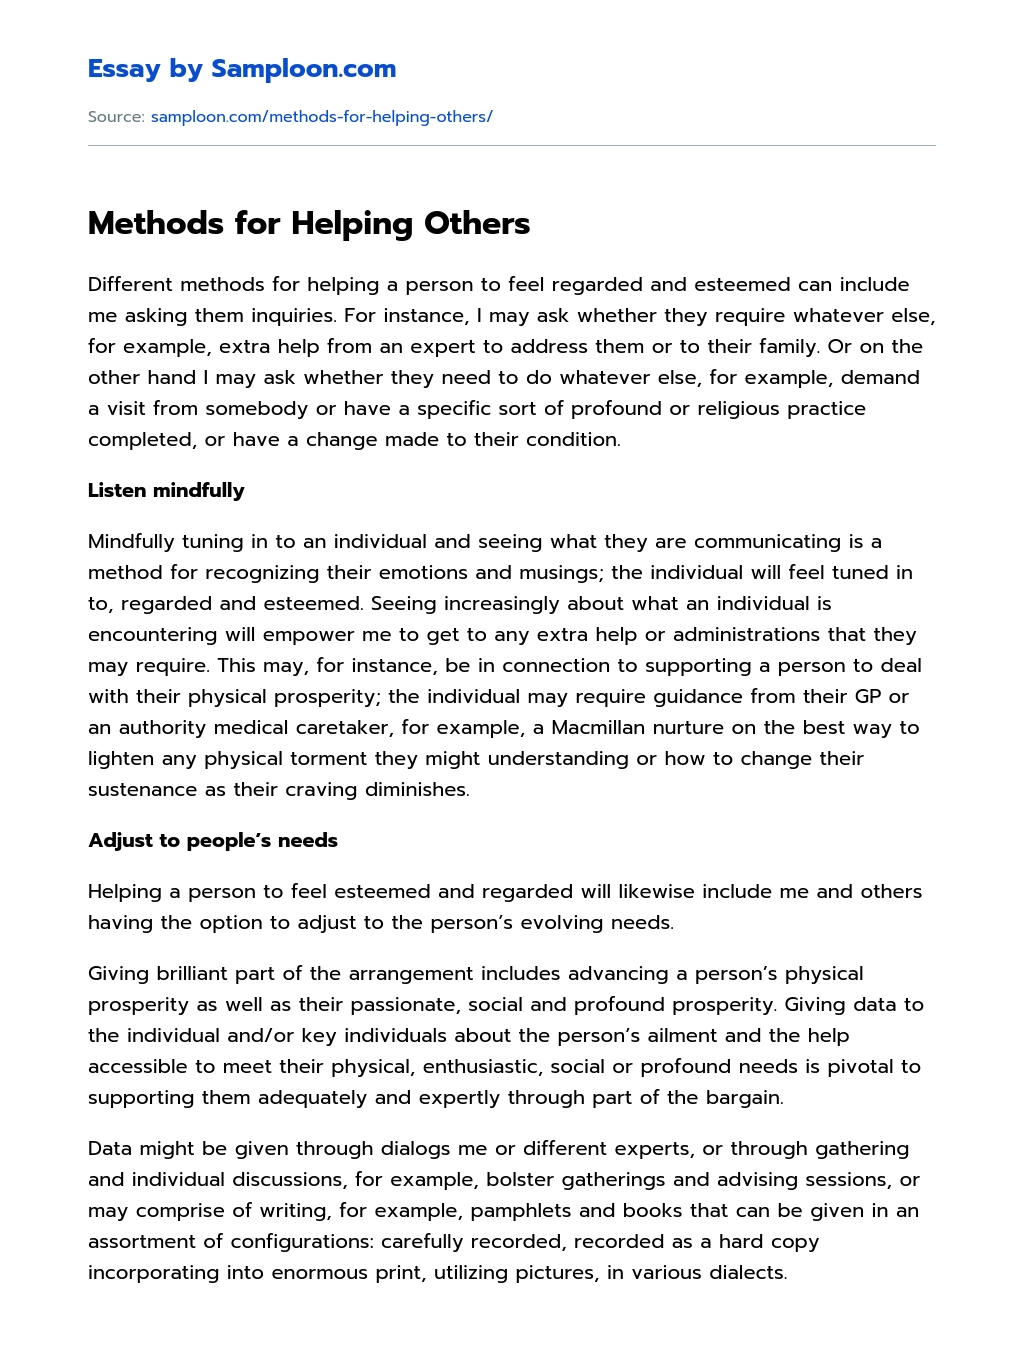 Methods for Helping Others essay